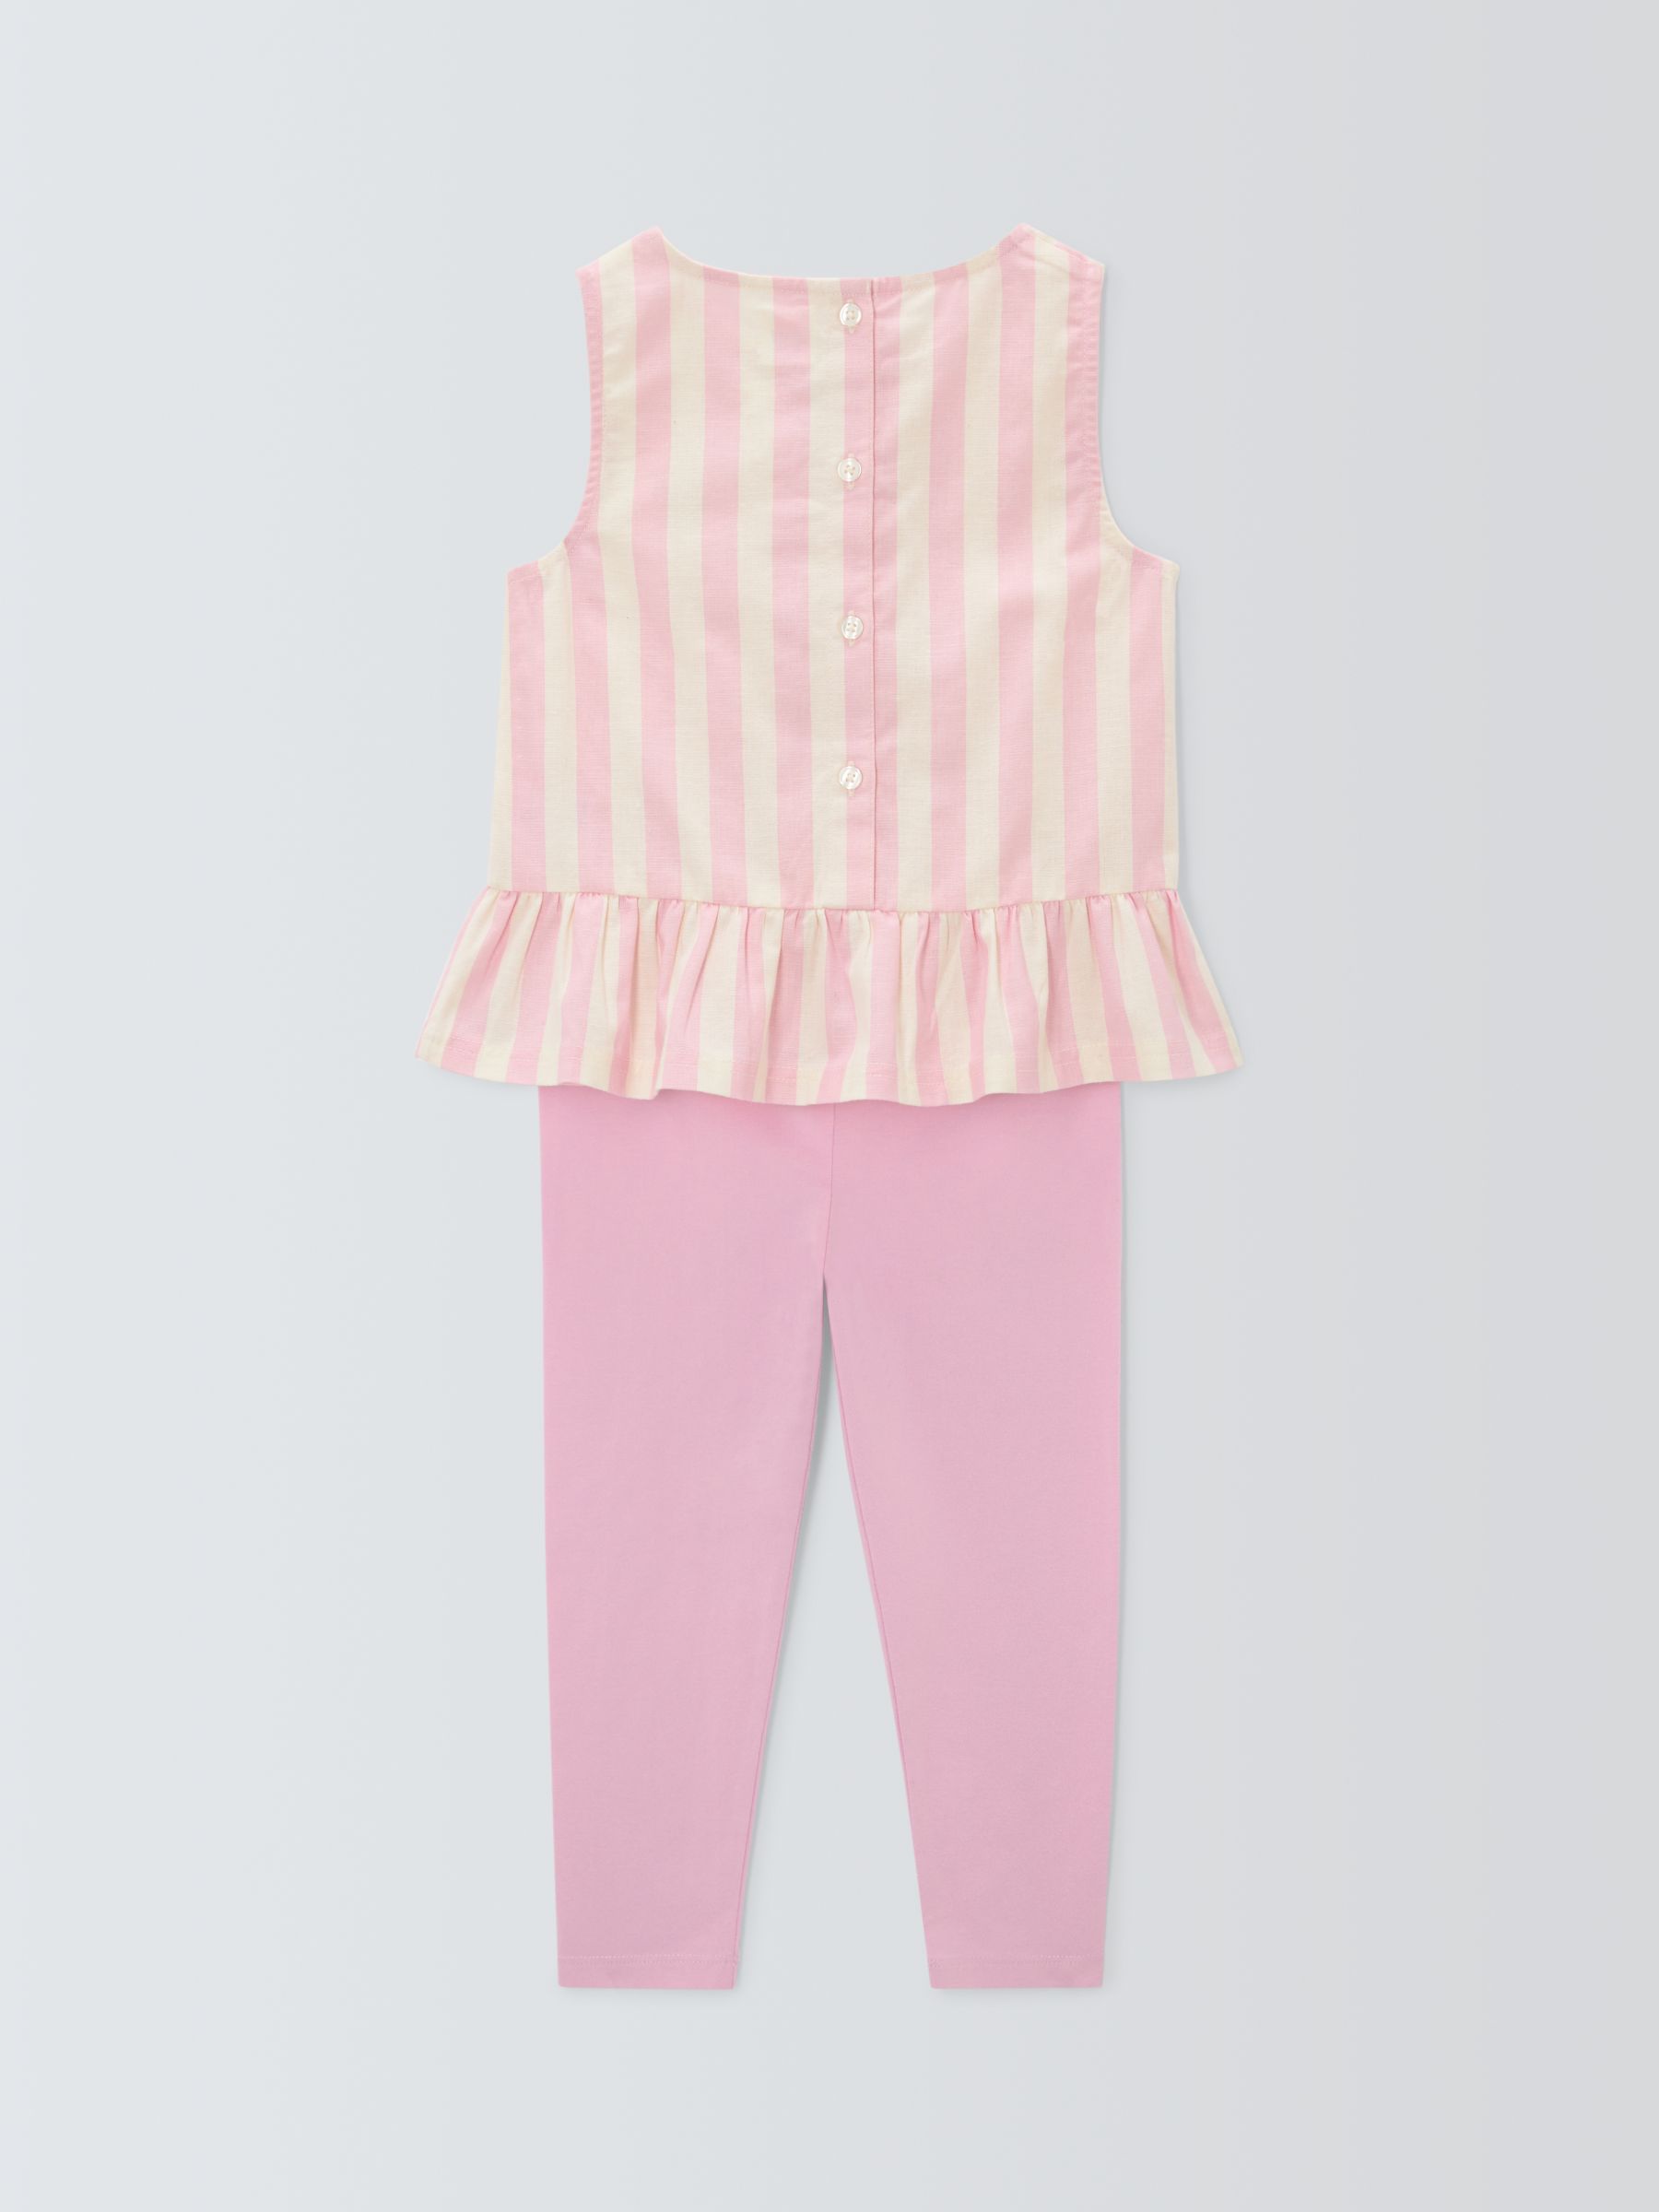 Buy John Lewis ANYDAY Baby Peplum Top and Leggings Outfit, Pink Online at johnlewis.com